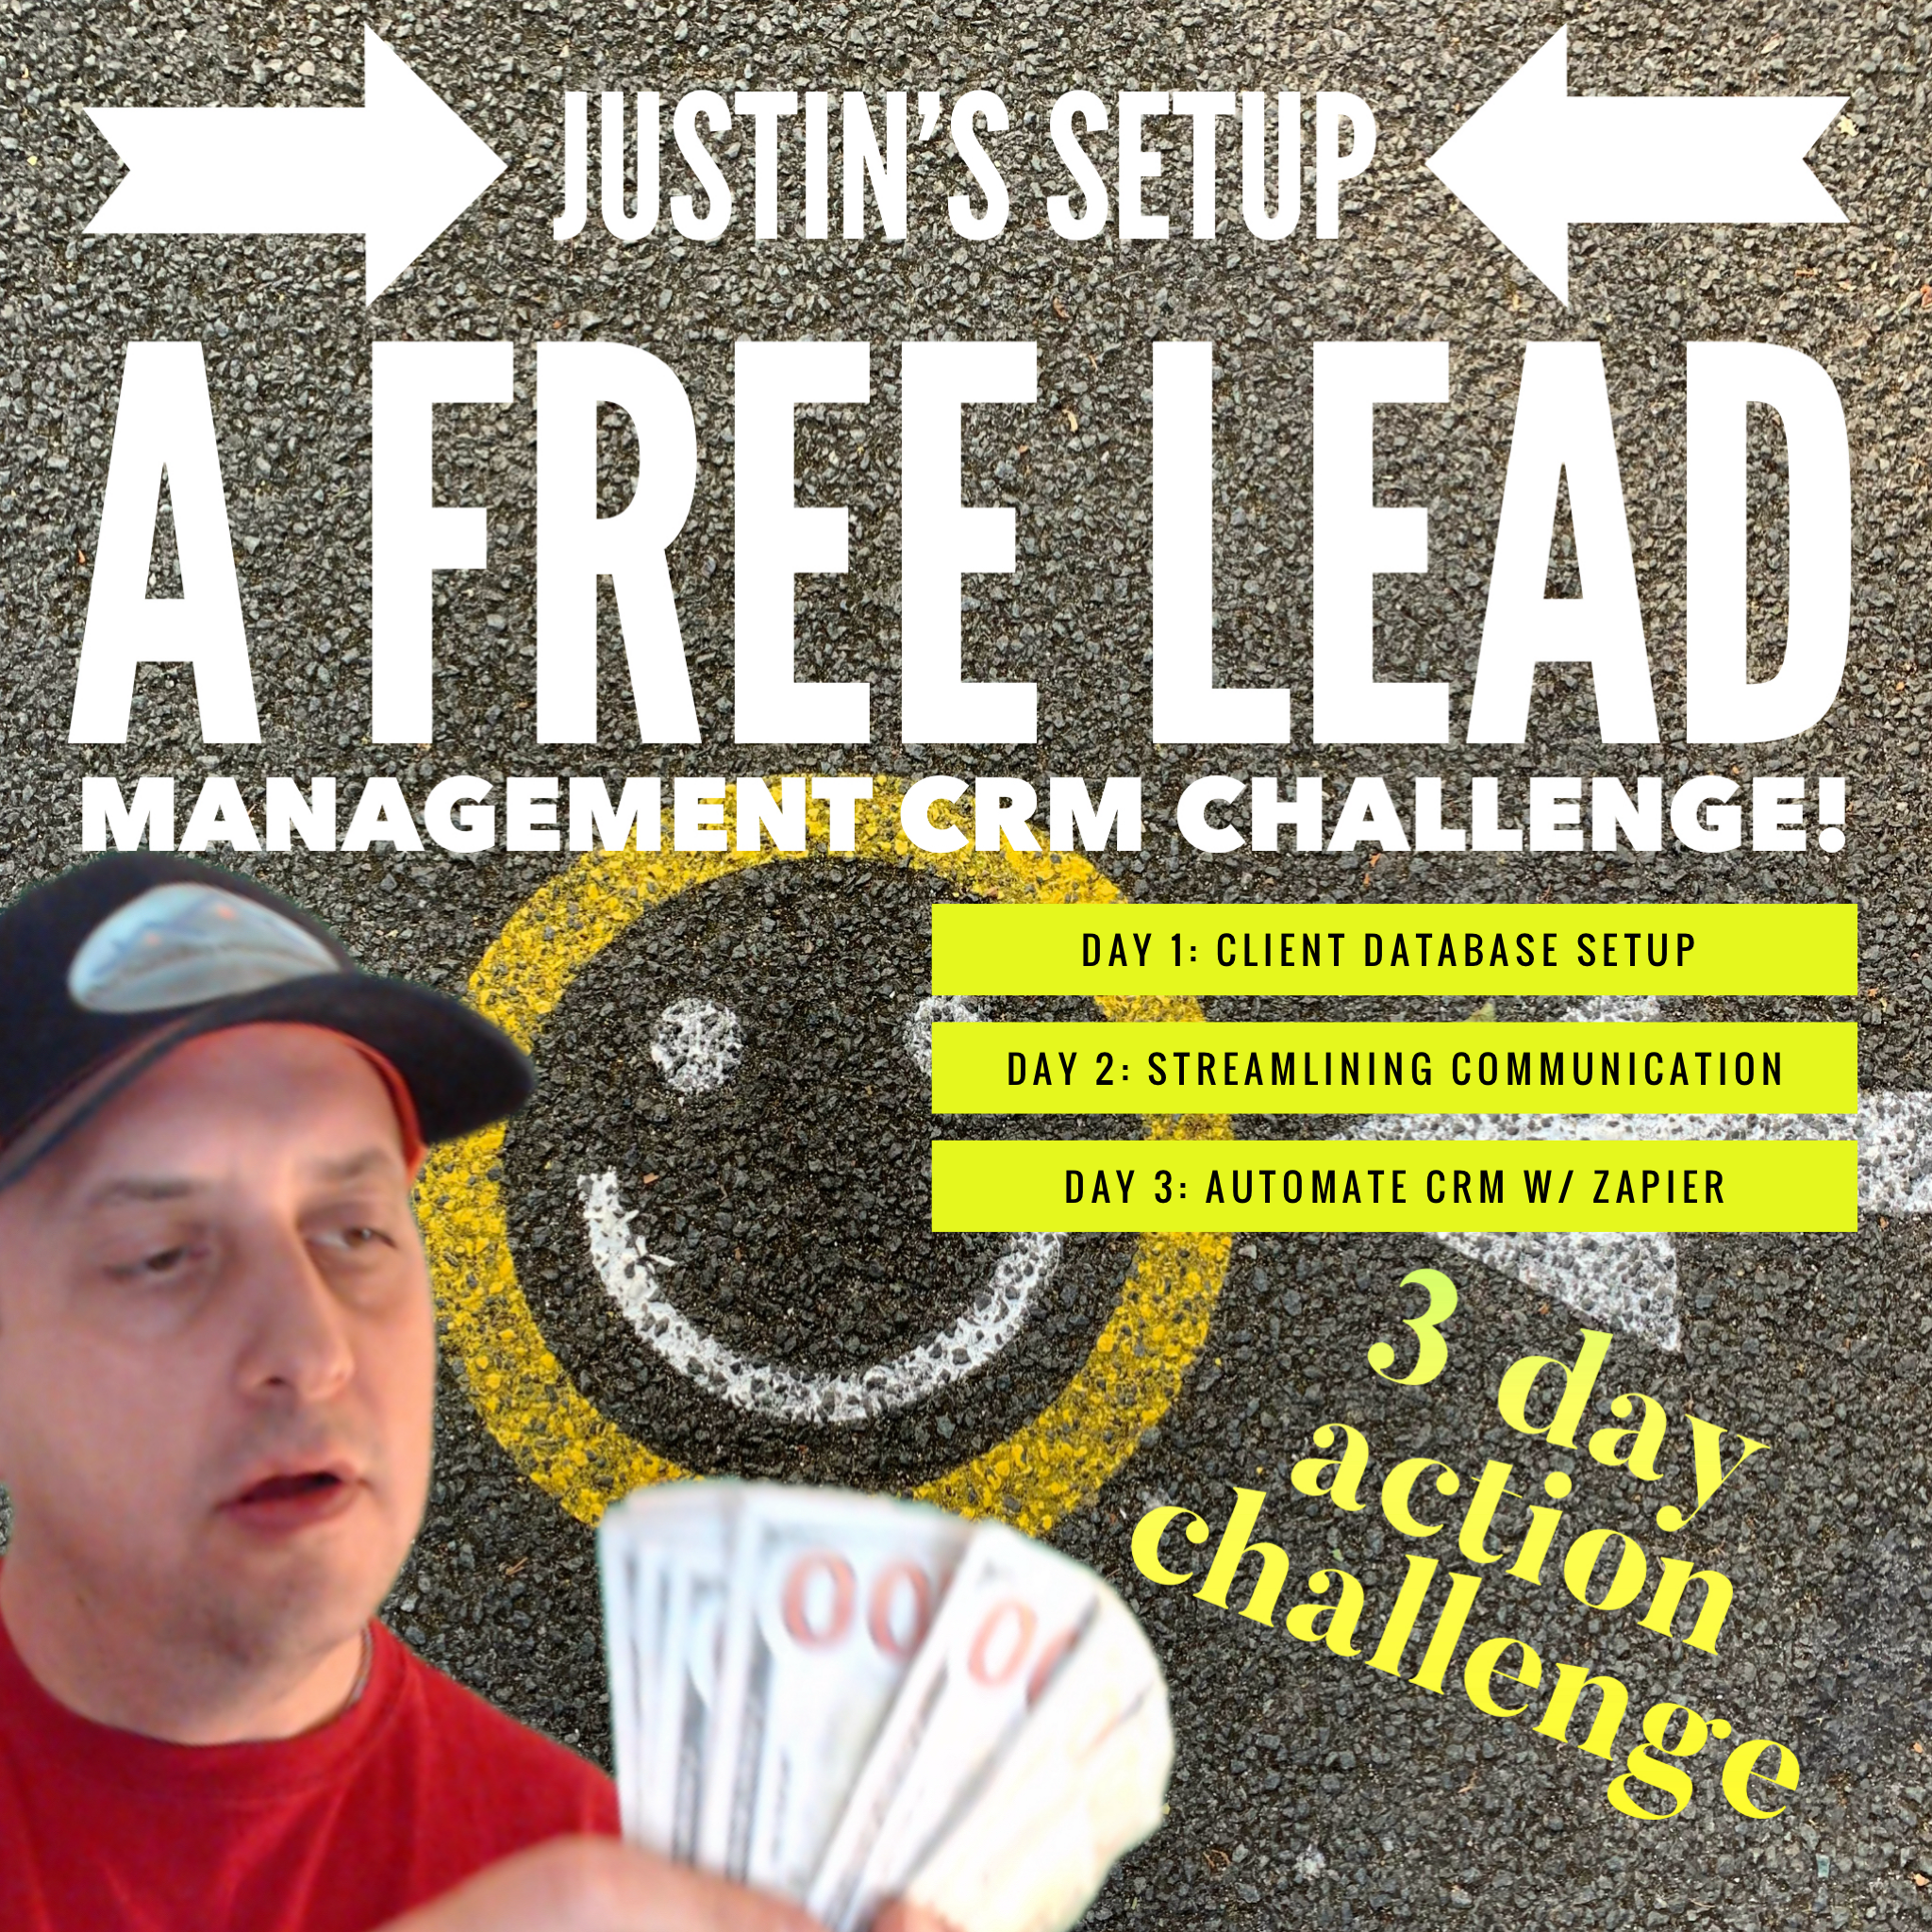 Justin's FREE FOREVER Lead Management CRM and Training Videos